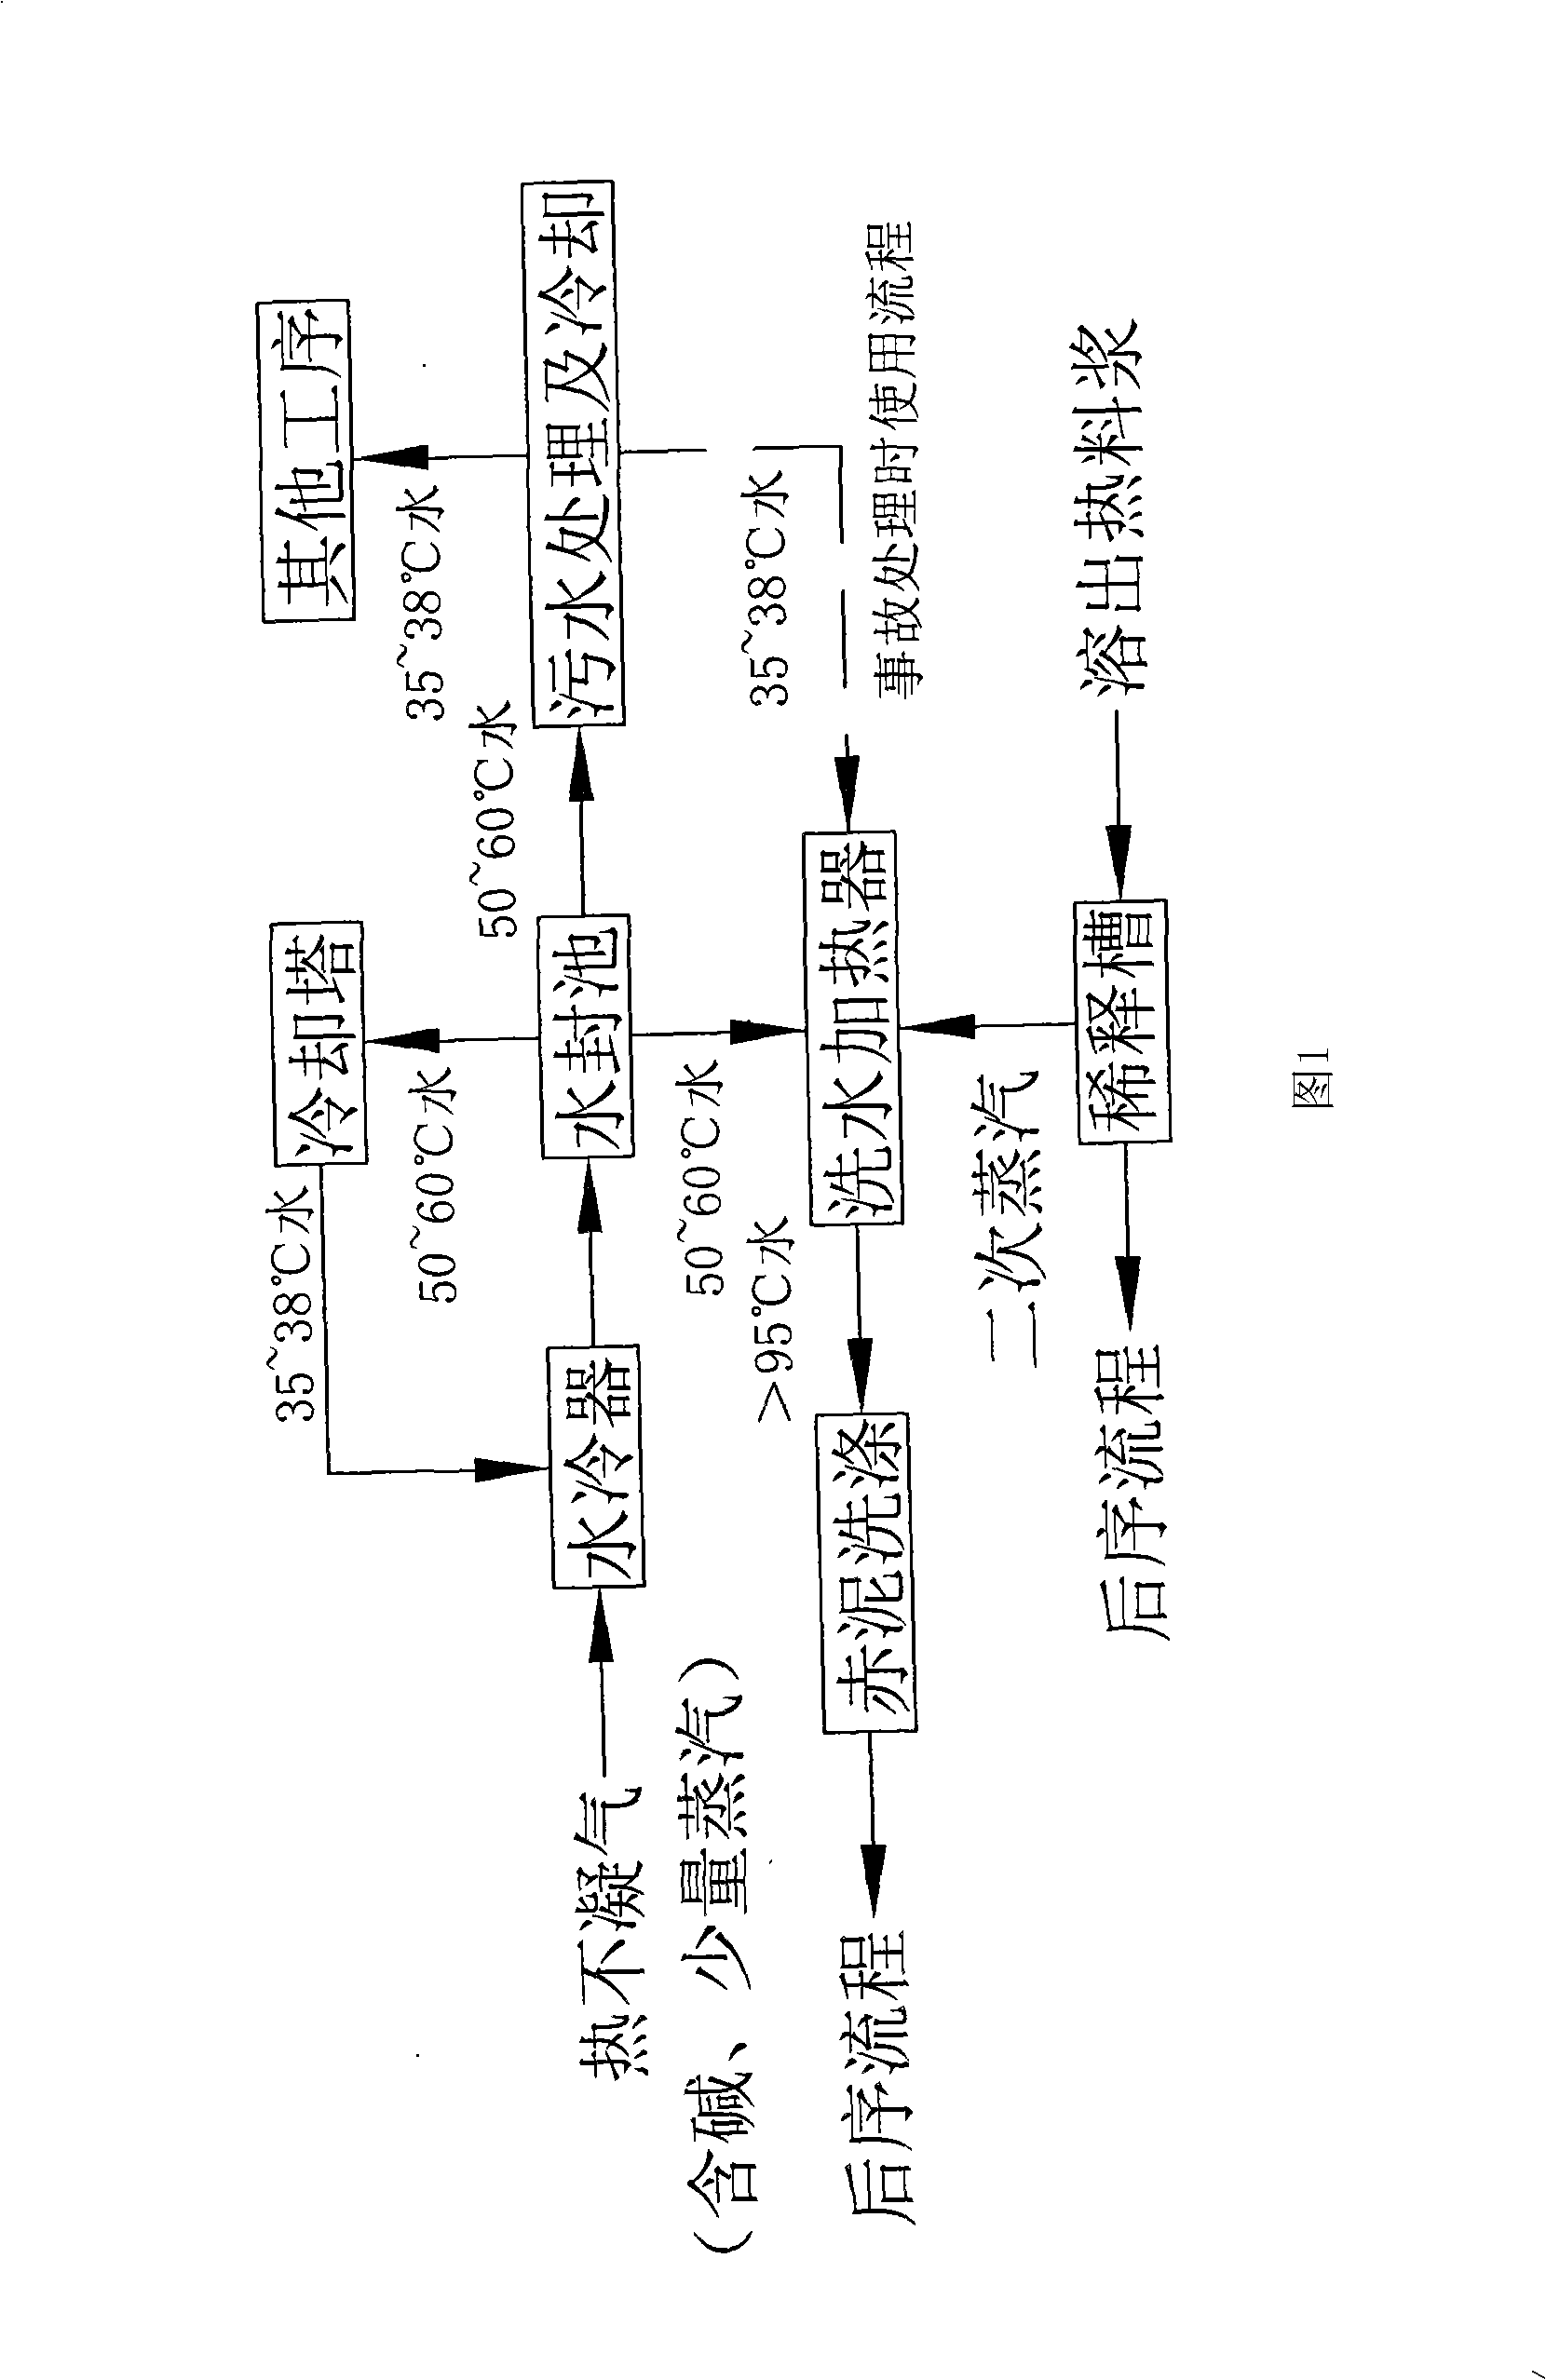 Method for utilizing circulation water in aluminum hydroxide or aluminum oxide production process